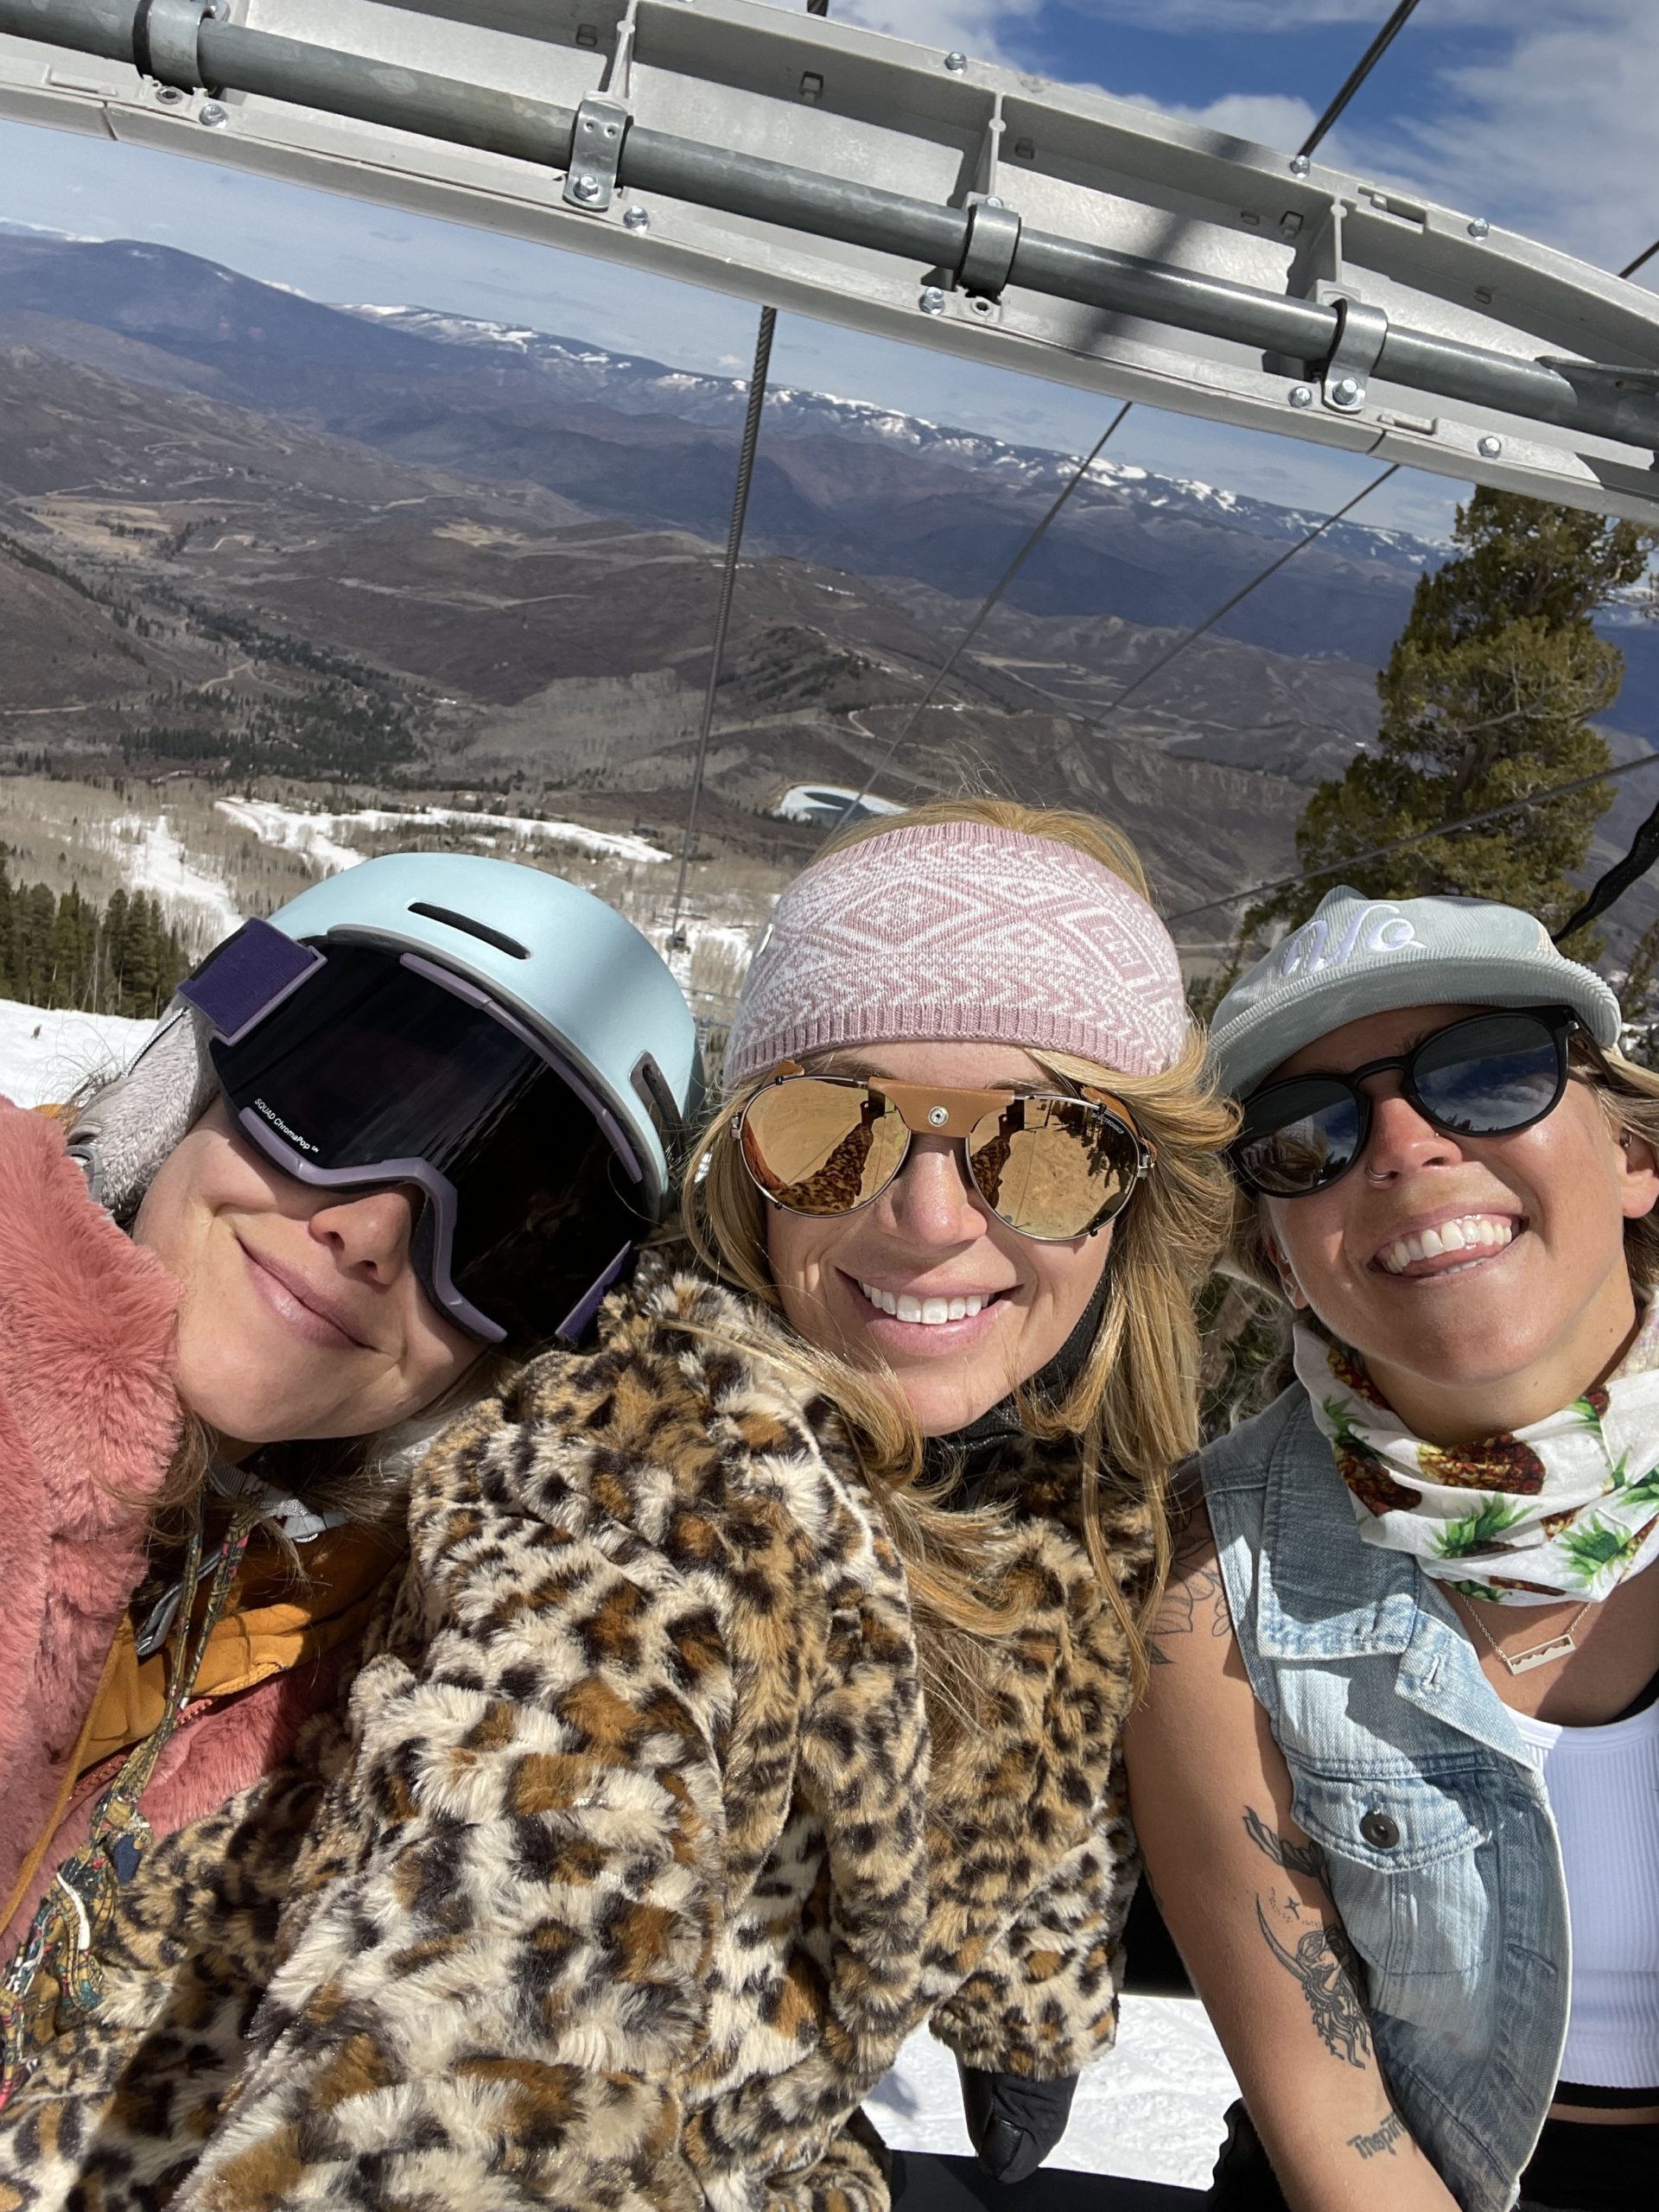 selfie of girlfriends on a ski lift chair together